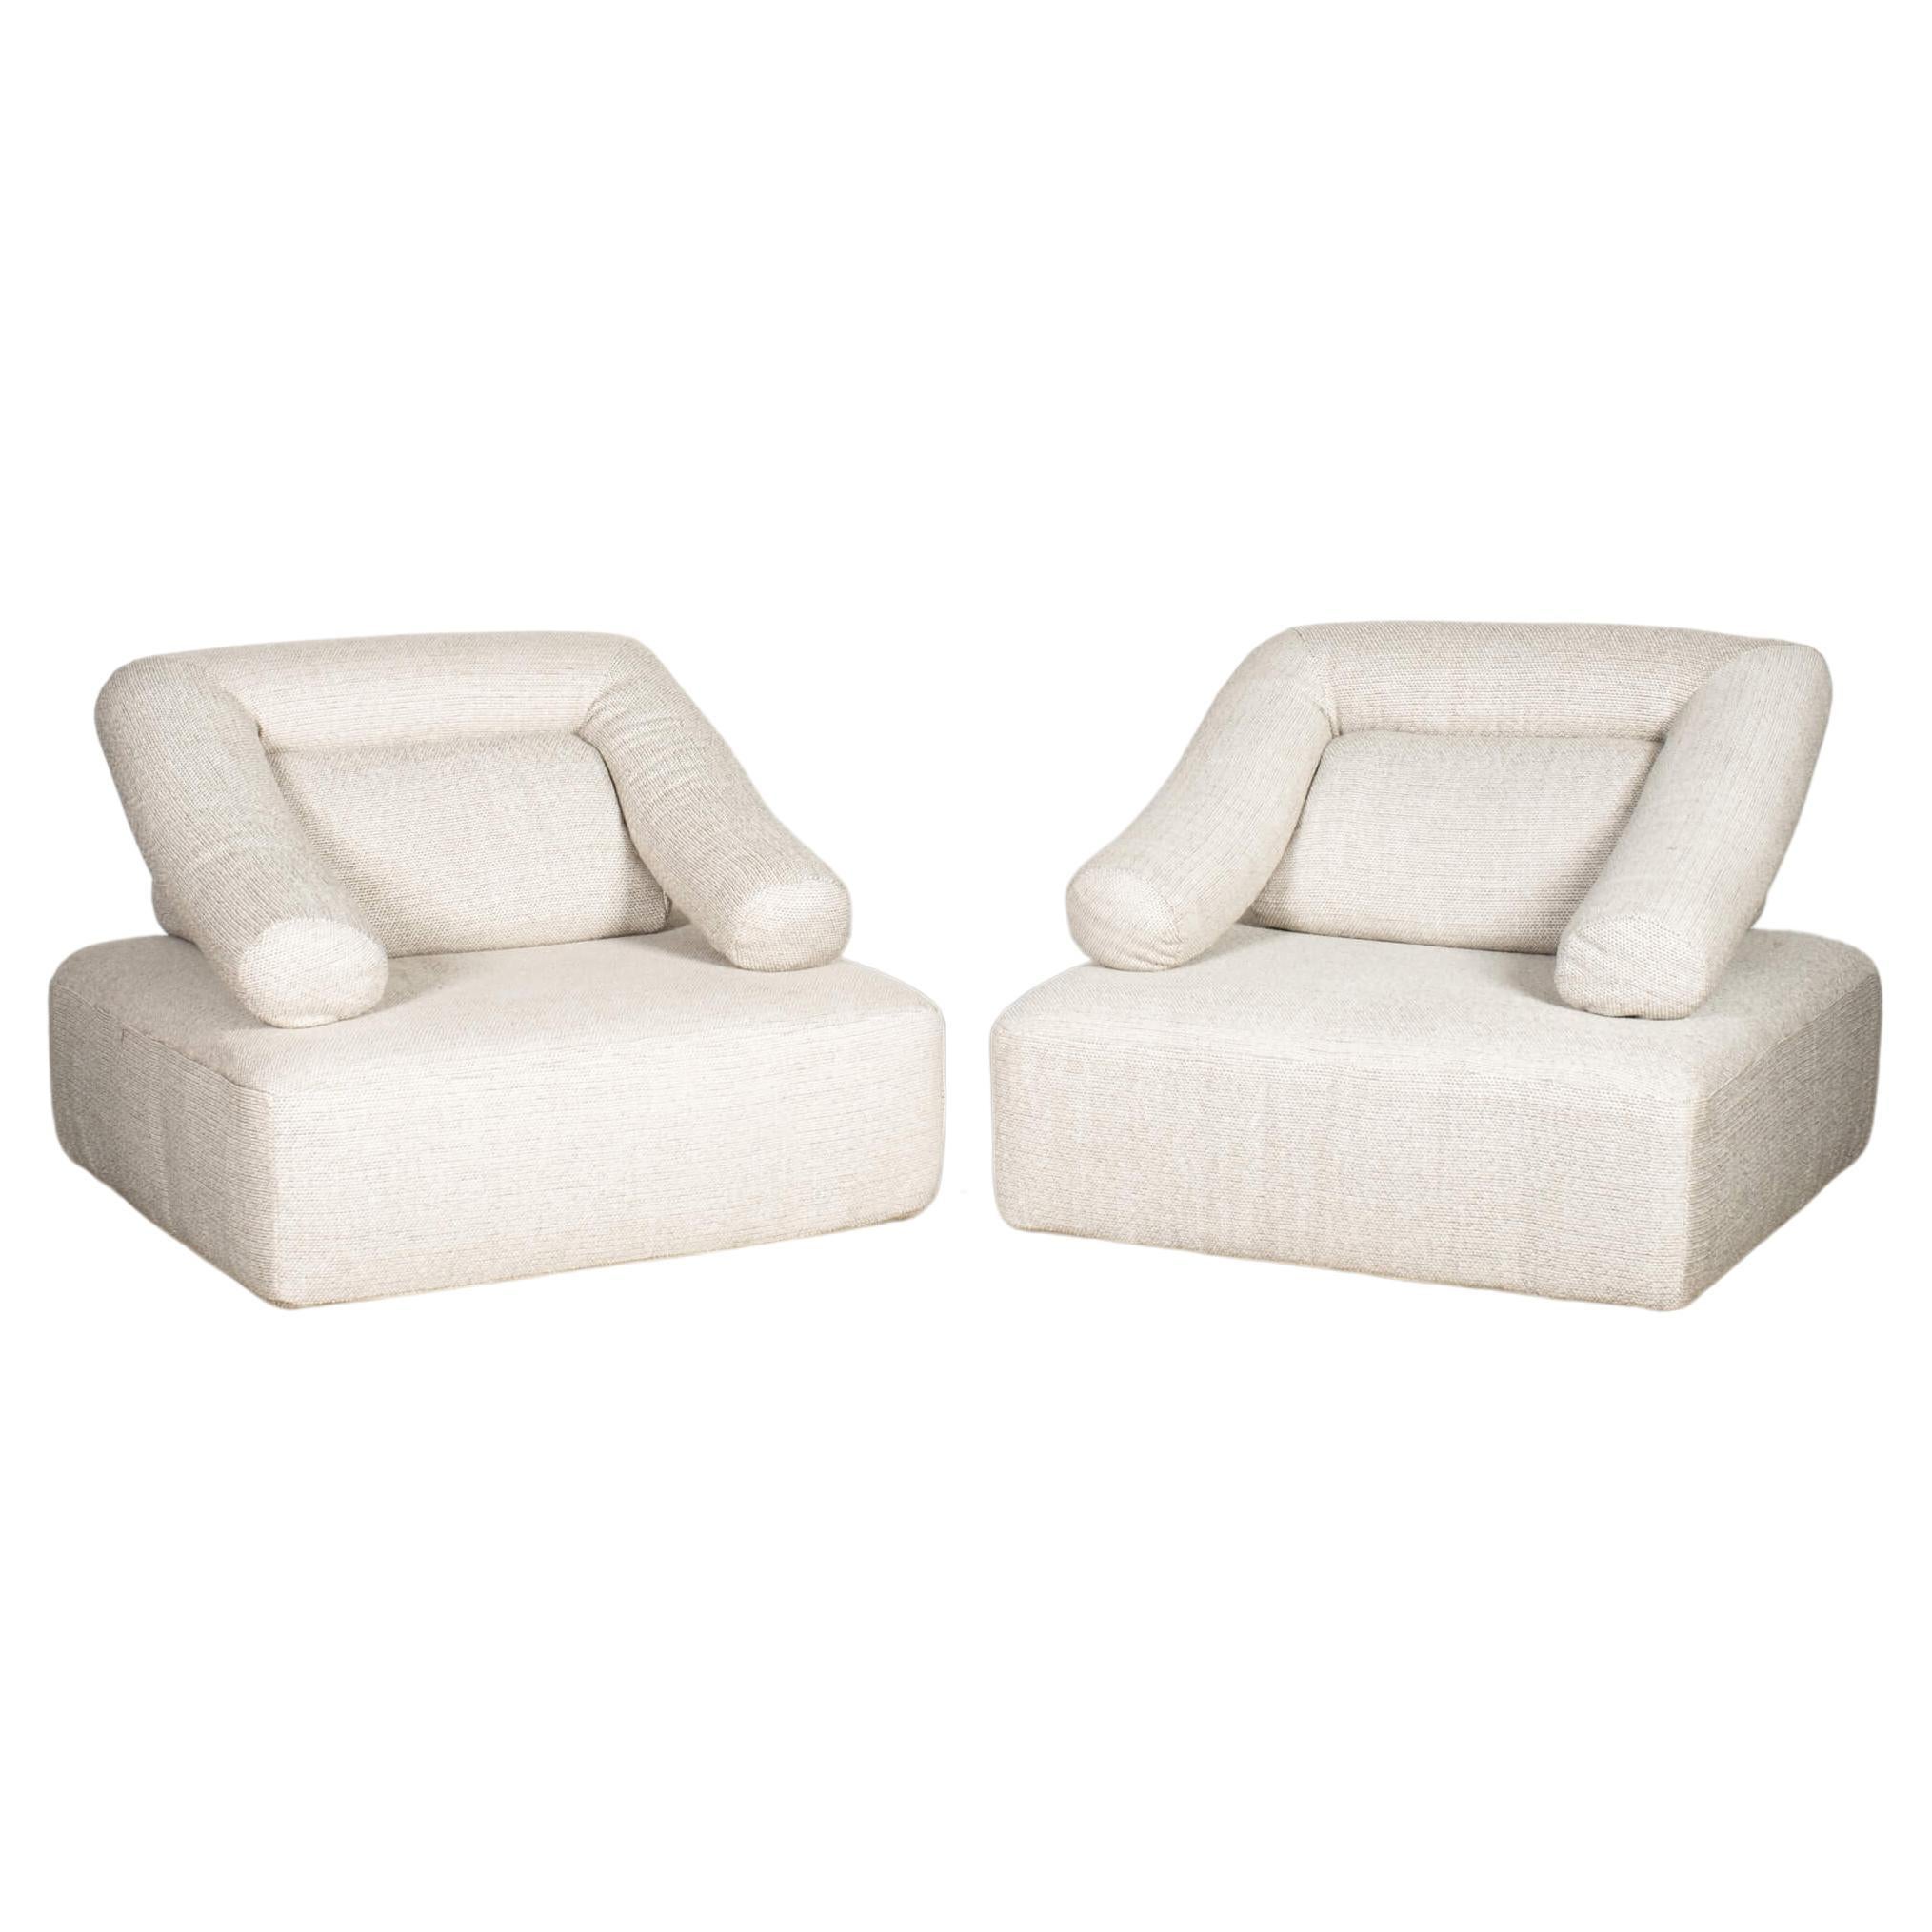 Pair of Ligne Roset 'Ego' Armchairs by D’urbino & Lomazzi For Sale